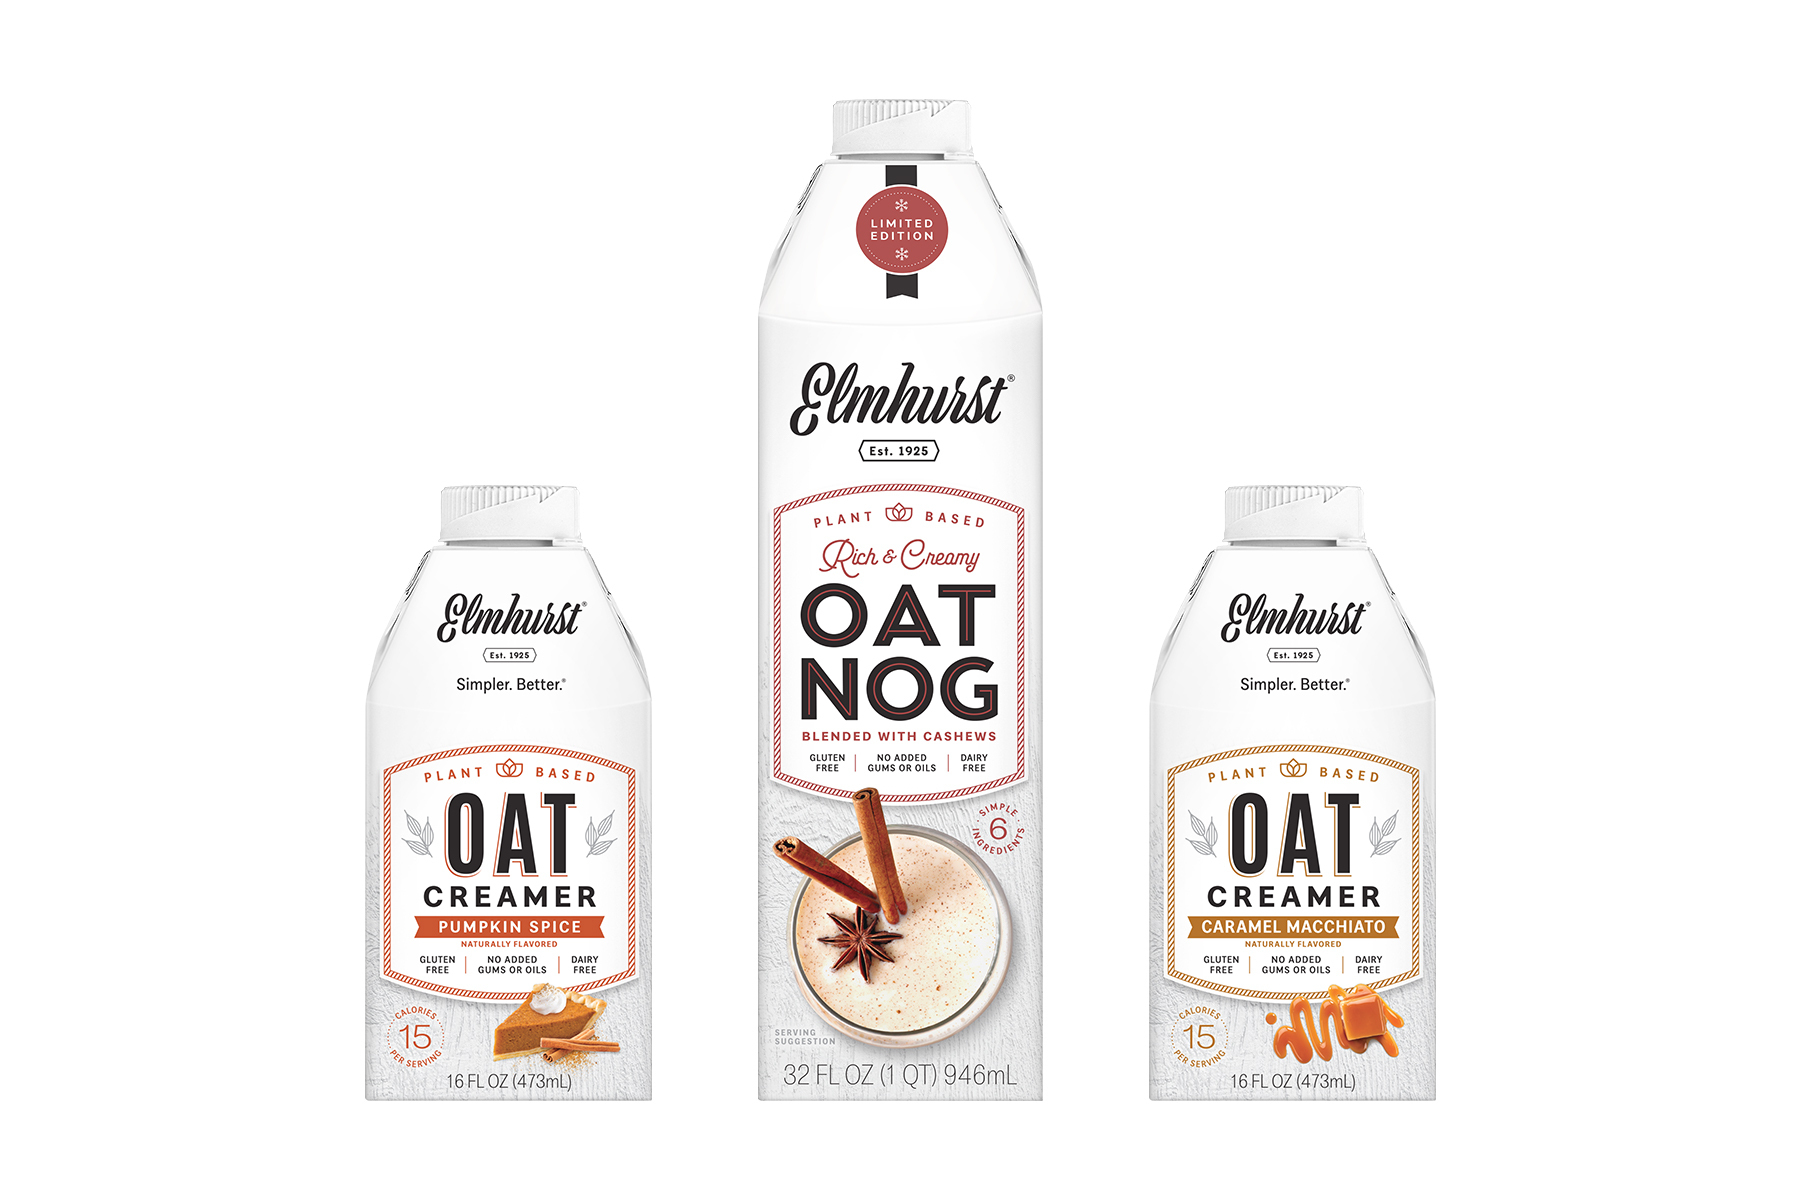 Elmhurst 1925 OatNog Review: The Perfect Dairy-Free Holiday Drink